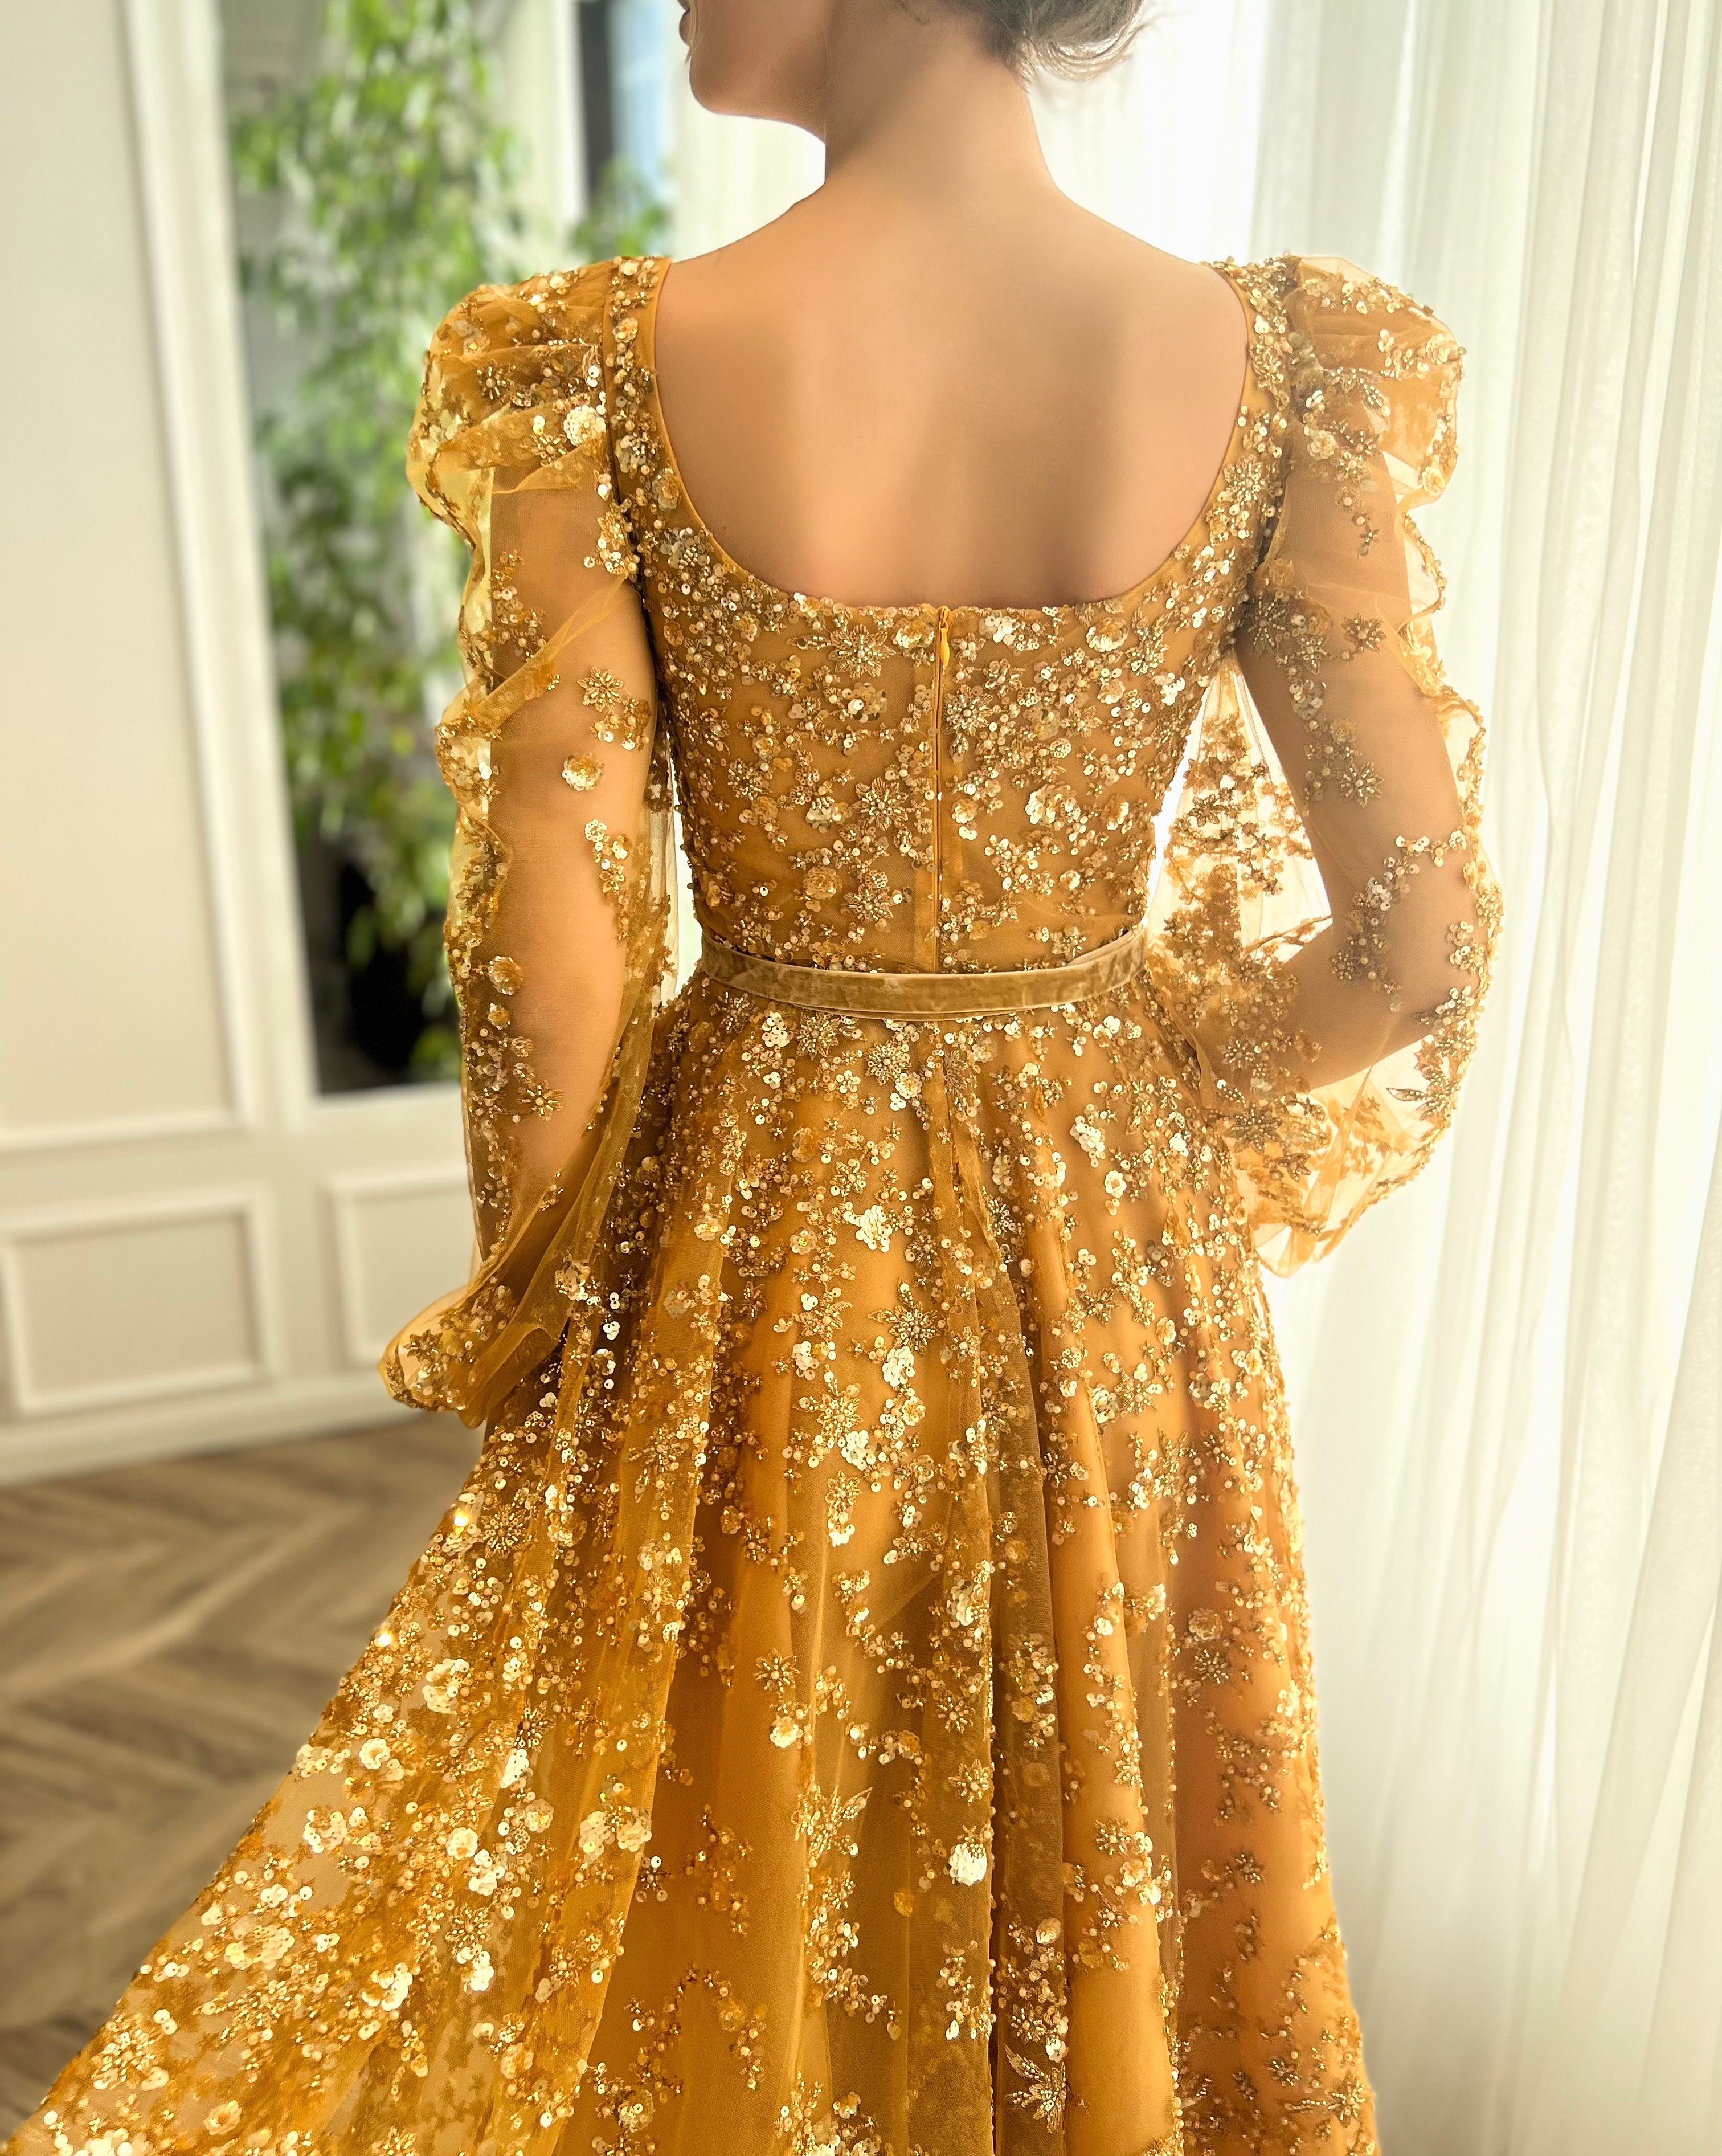 Gold A-line dress with long sleeves, belt and beading.